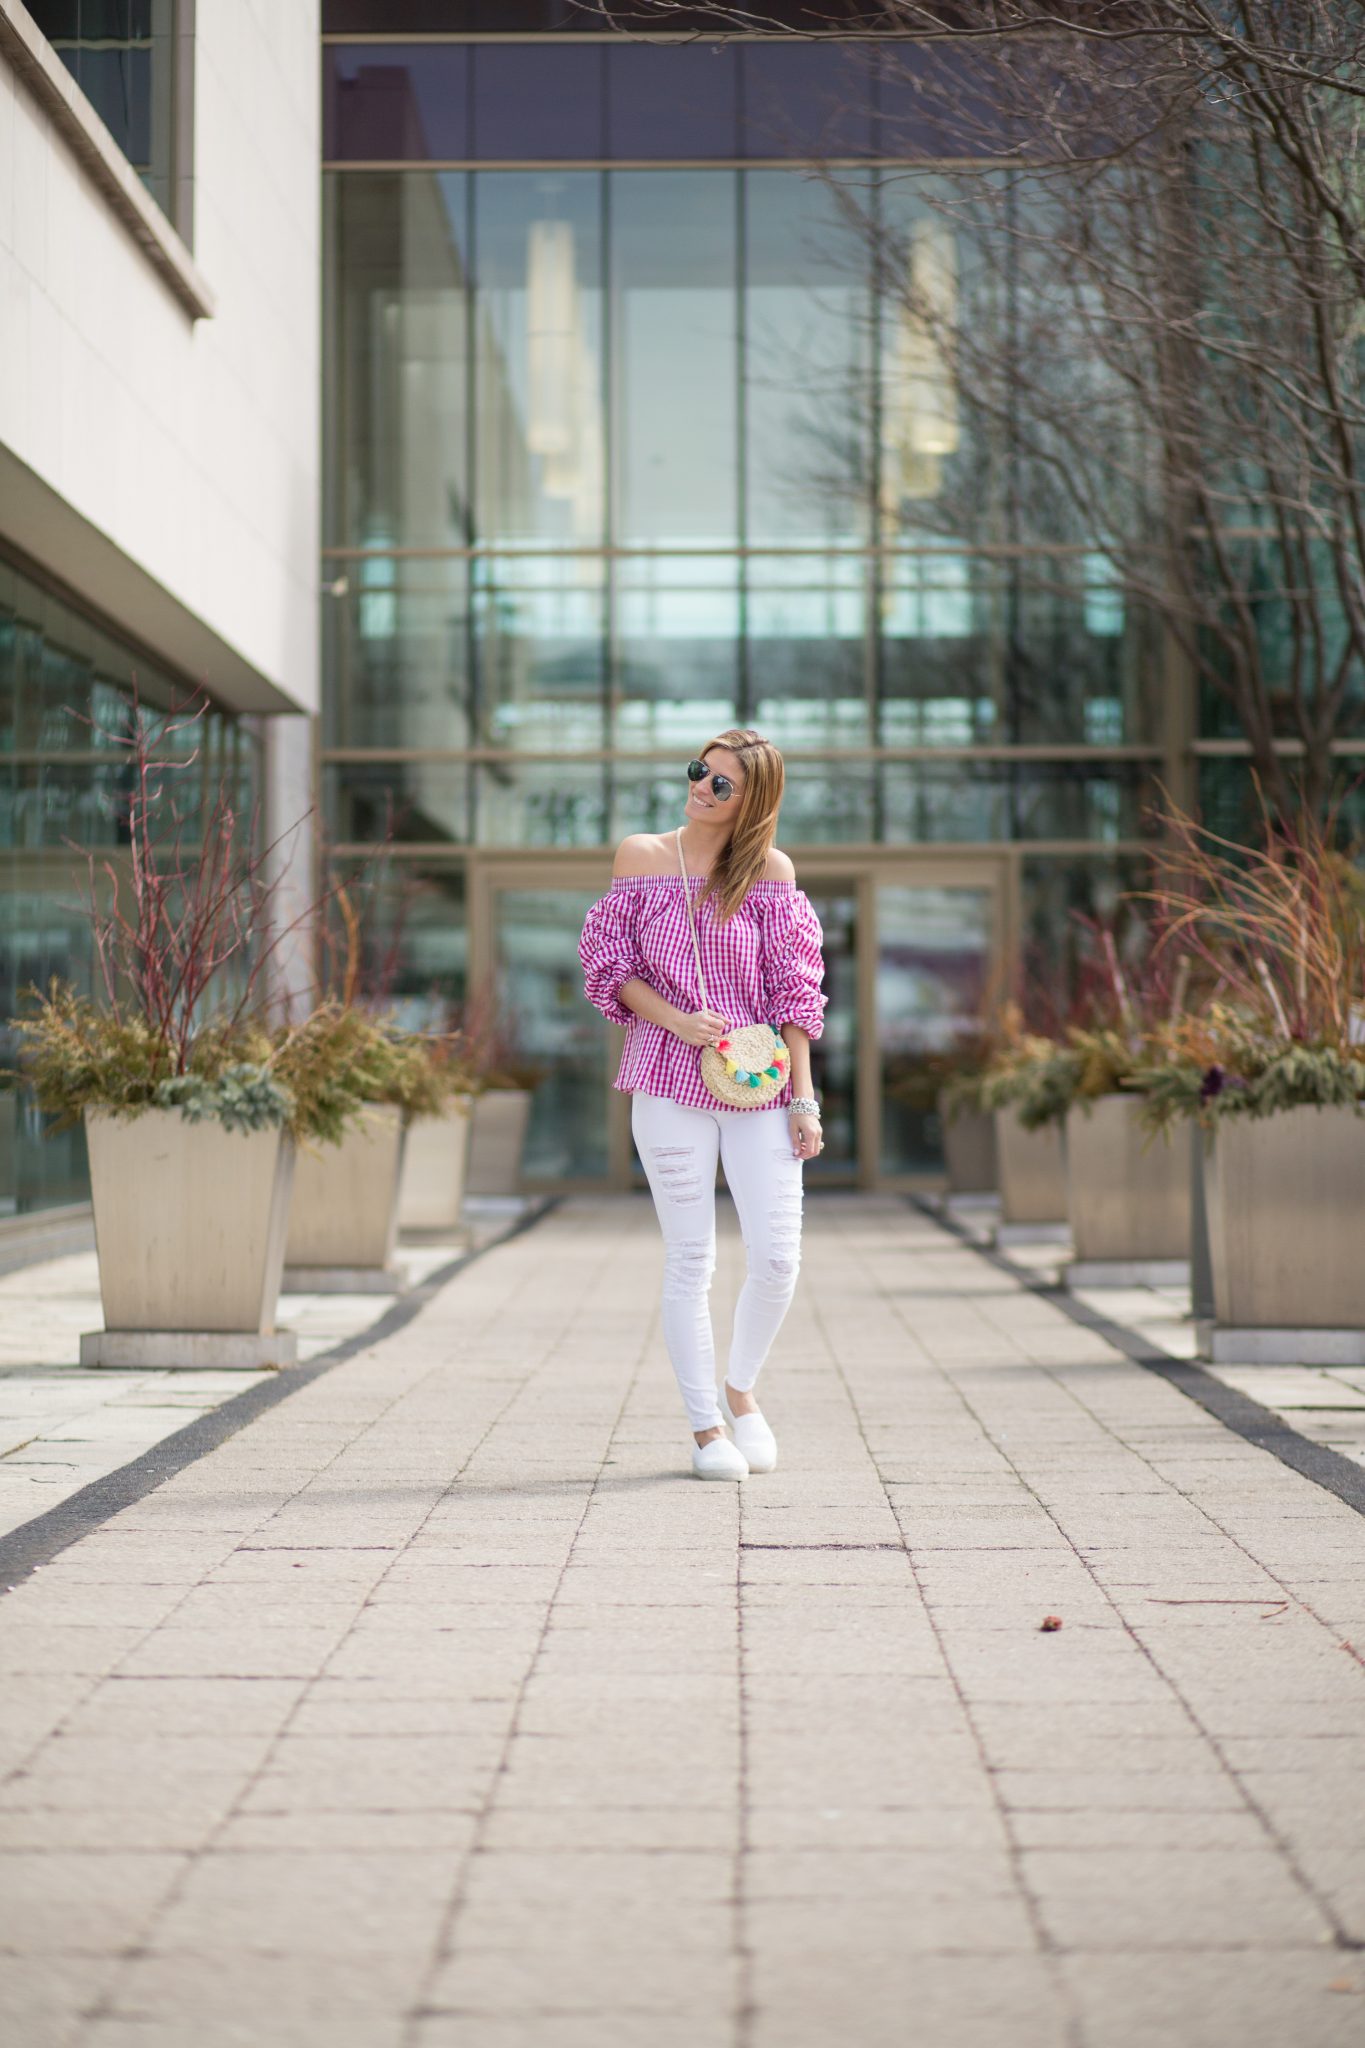 sparkleshinylove Chicwish Gingham Channel Off-shoulder Top in Hot Pink, White J.Brand distressed jeans, Chanel white espadrilles, tassel cross body from Zara, Silver Ray-Ban Aviators